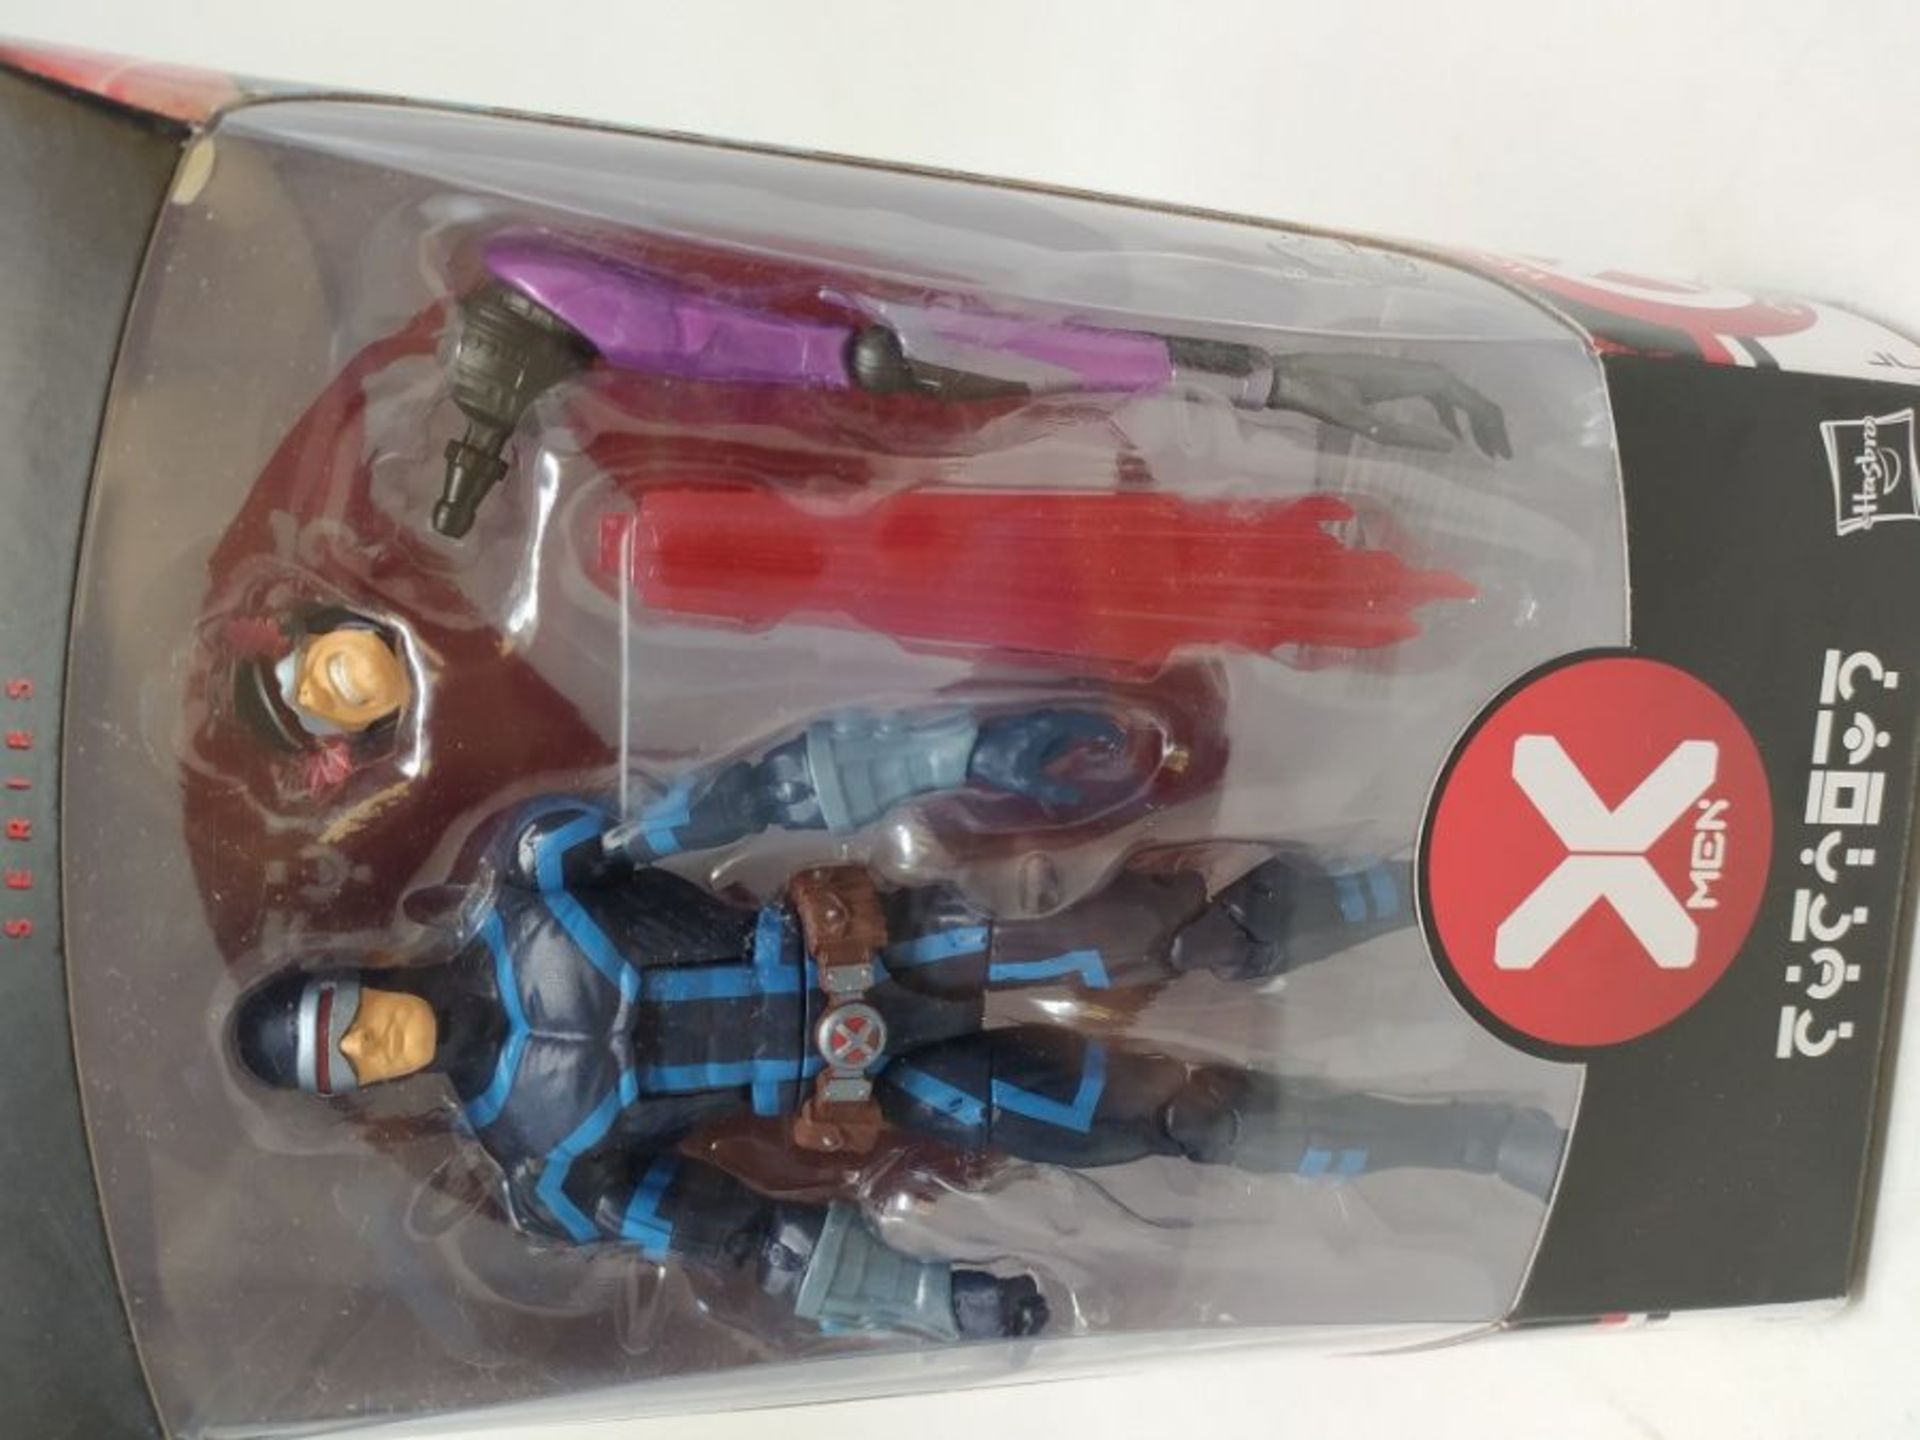 Hasbro Marvel Legends X-Men Series 6-inch Collectible Cyclops Action Figure Toy, Premi - Image 2 of 2